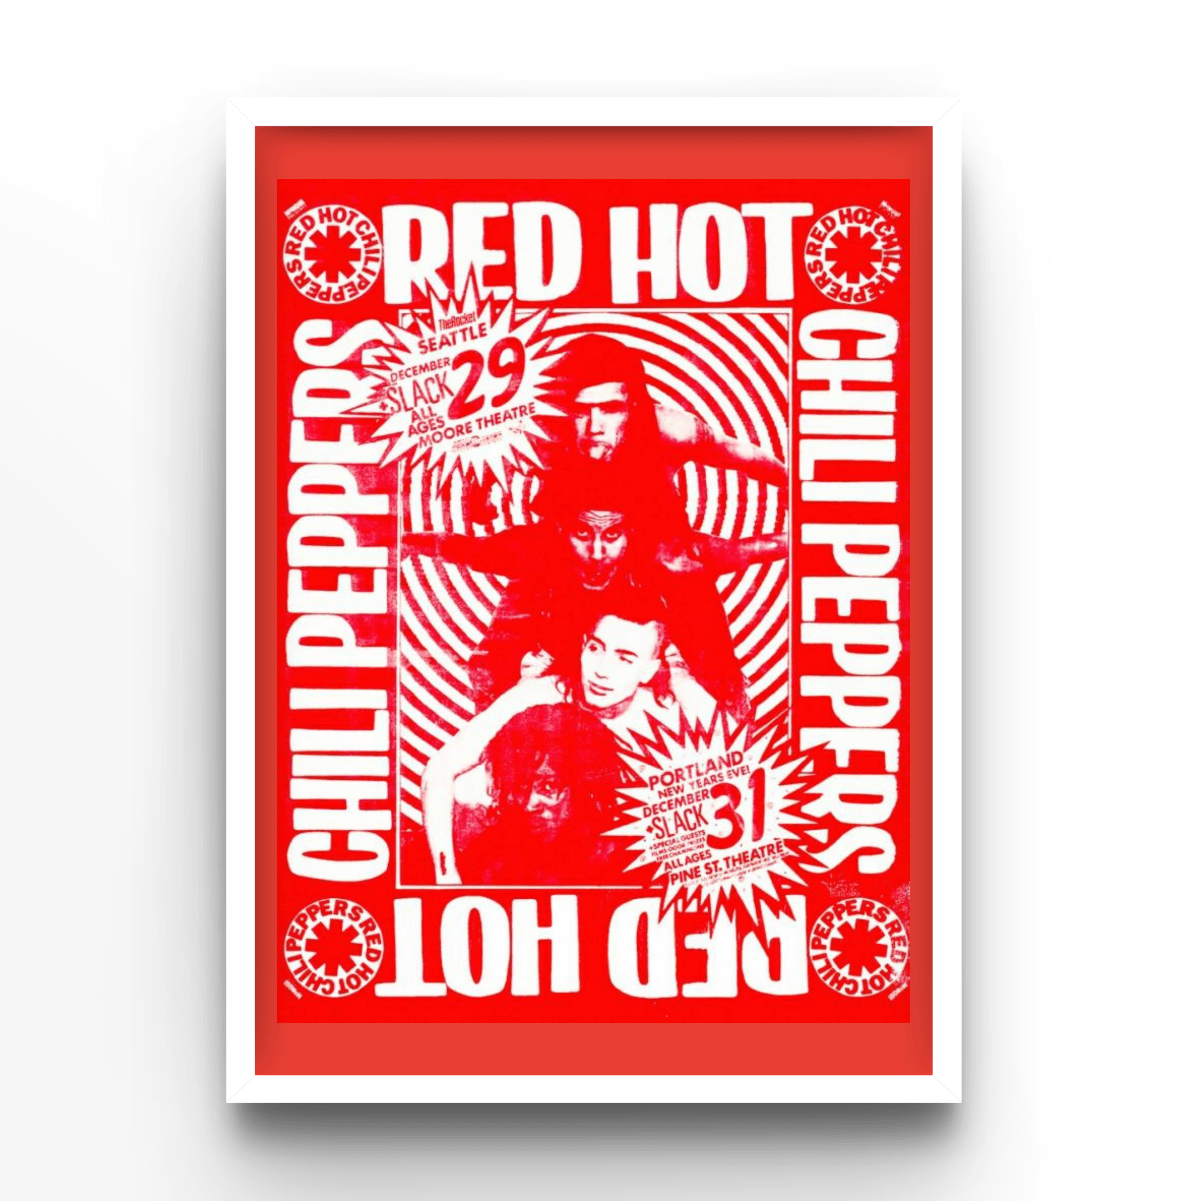 Red Hot Chili Peppers Seattle - A4, A3, A2 Posters Base - Poster Print Shop / Art Prints / PostersBase